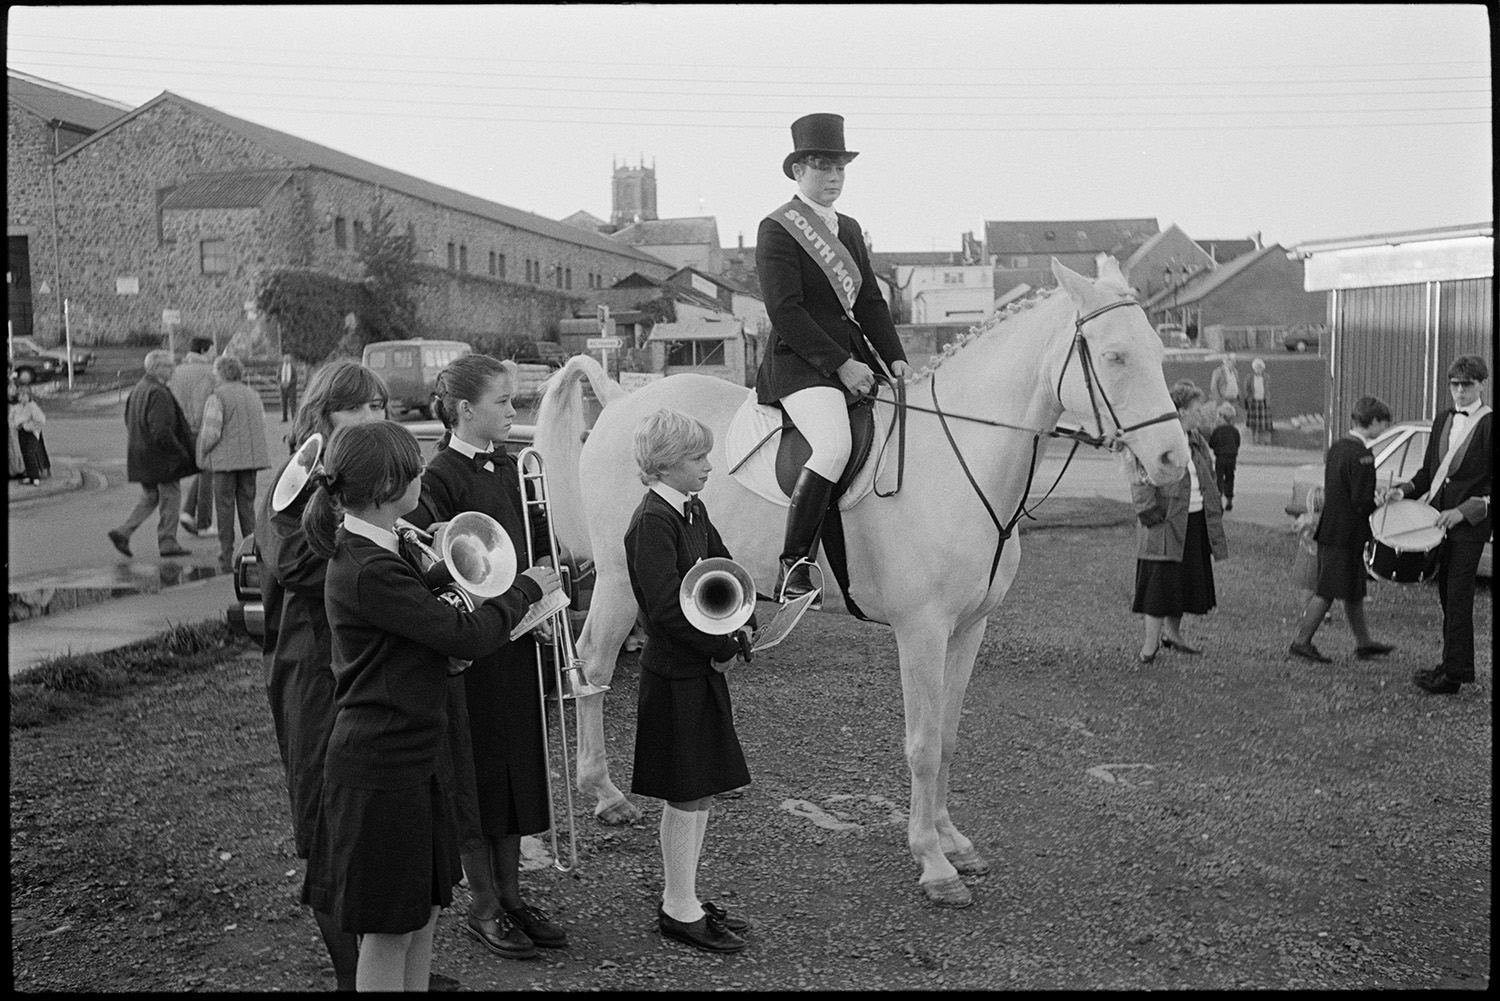 Spectators waiting for start of fair in town square. 
[Four children with instruments and a child riding a horse waiting for the start of South Molton Fair in the town square.]